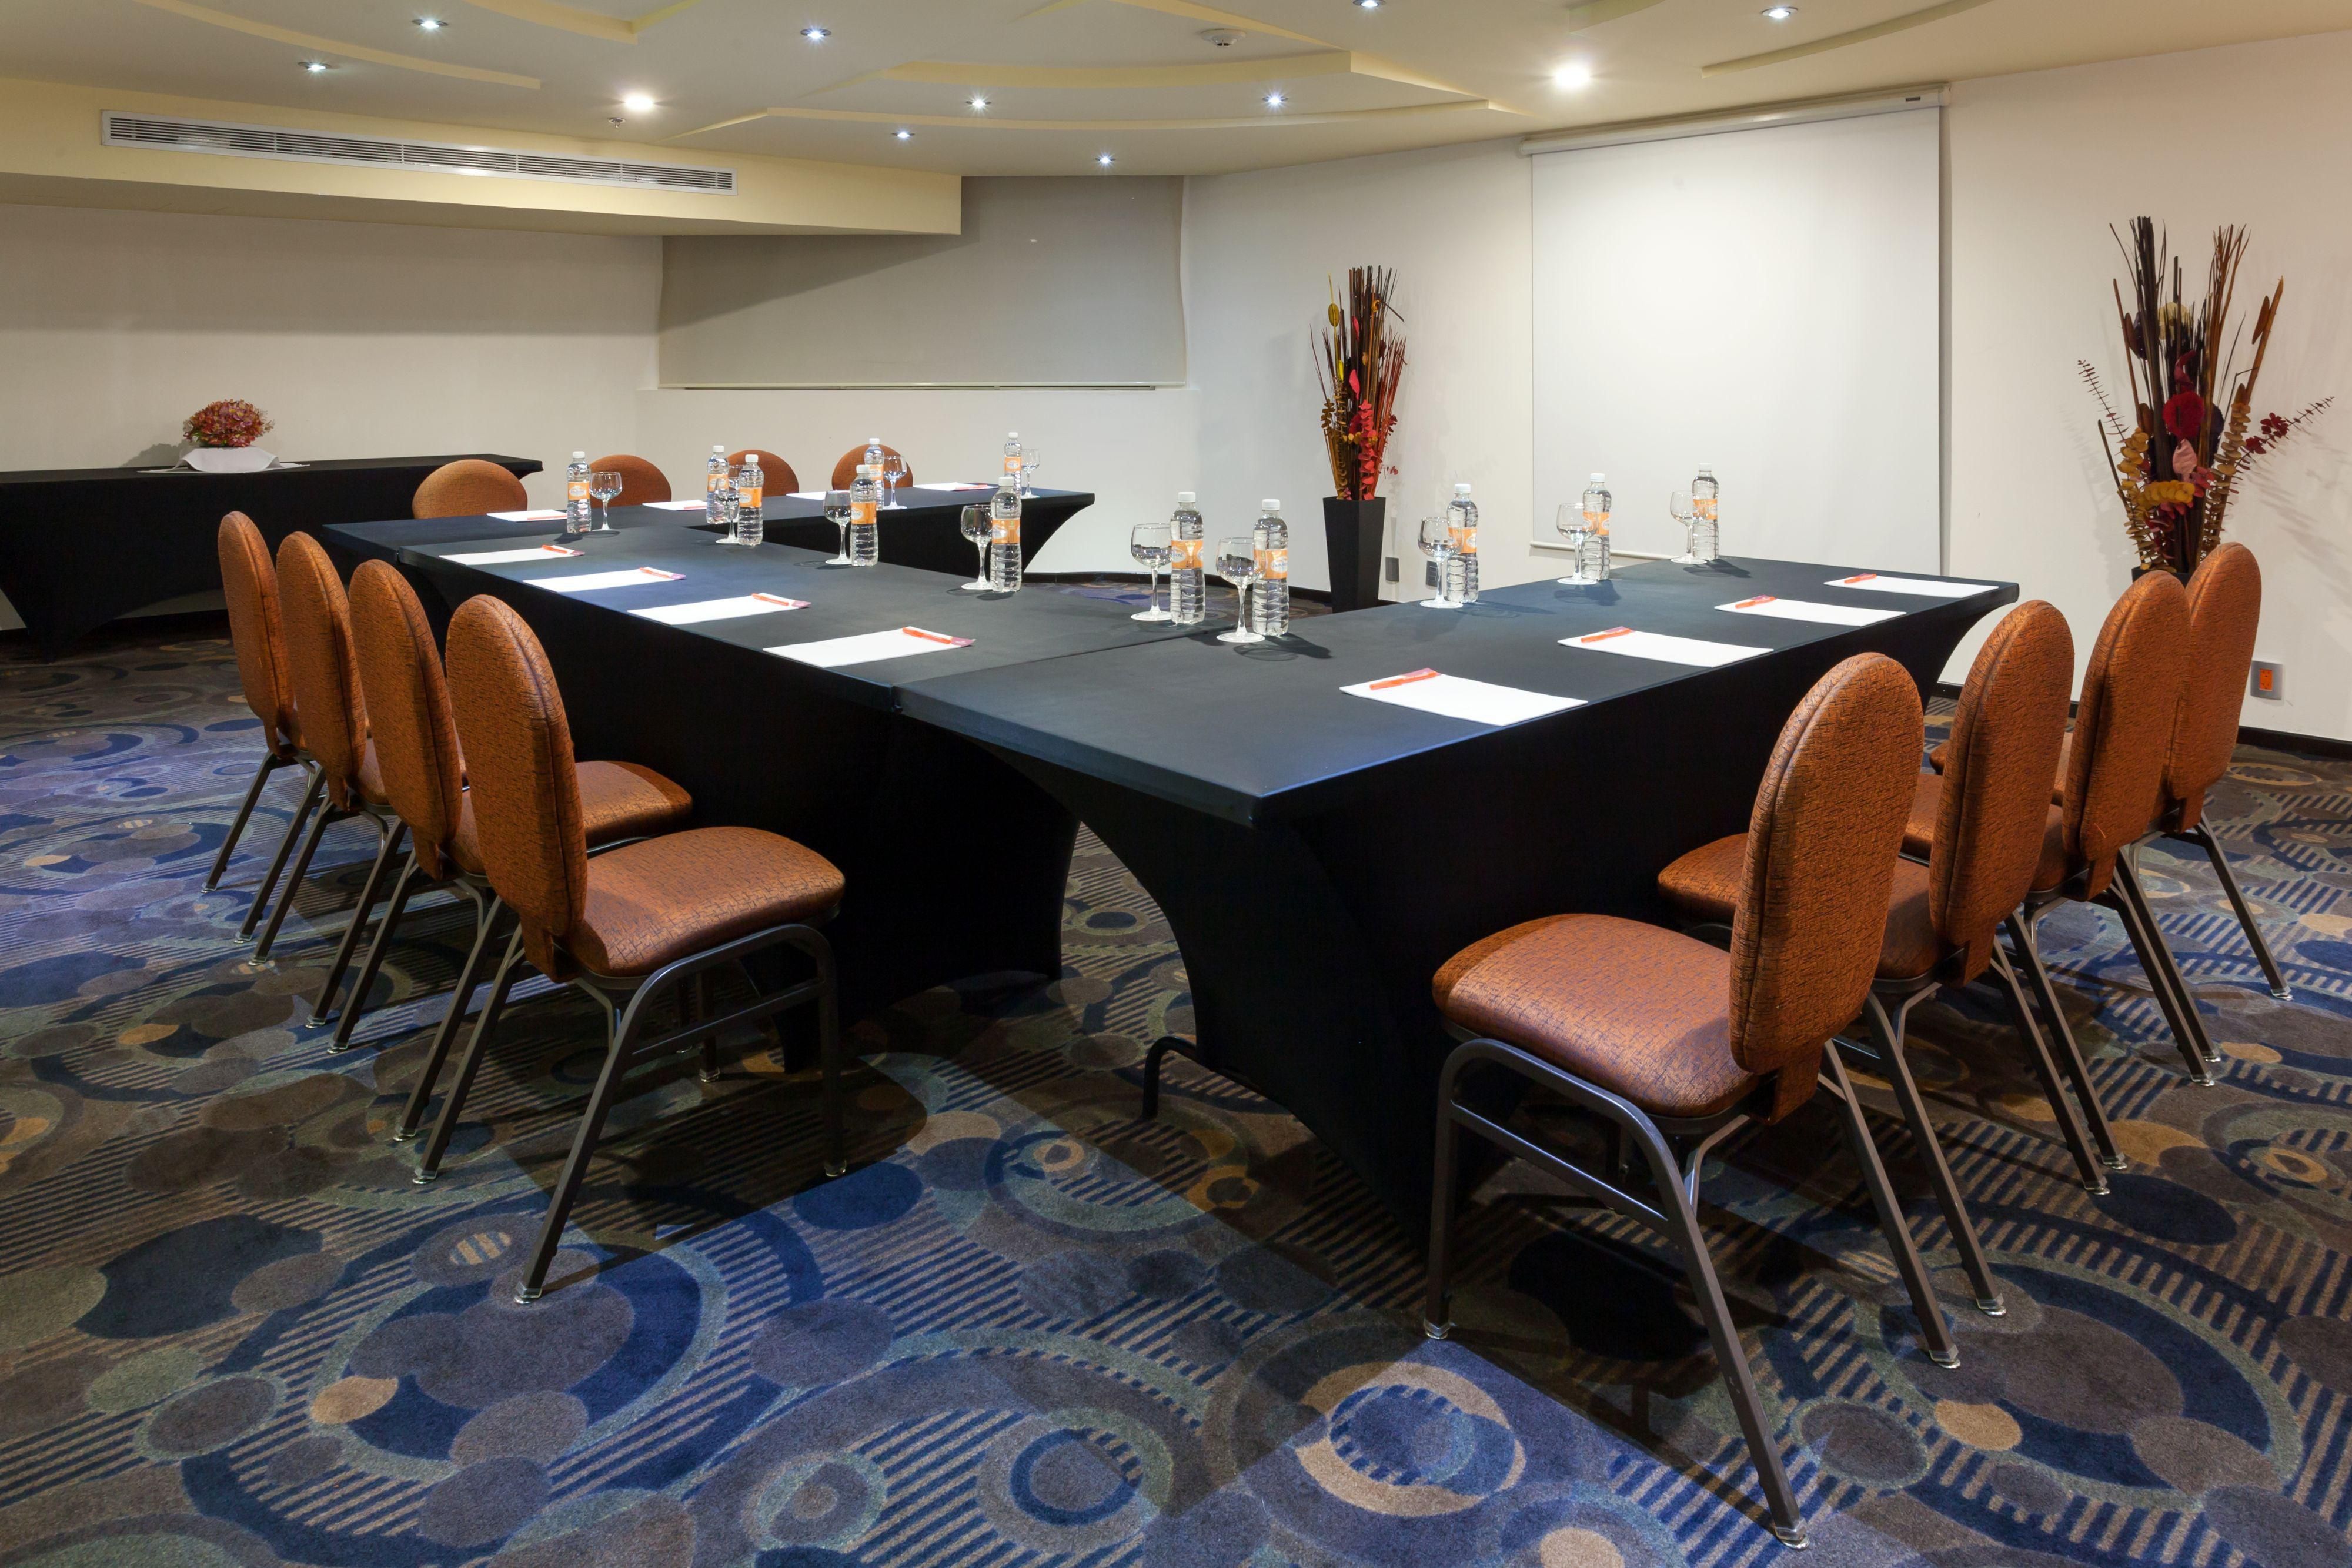 The Agave Salon Conference and Meeting Room